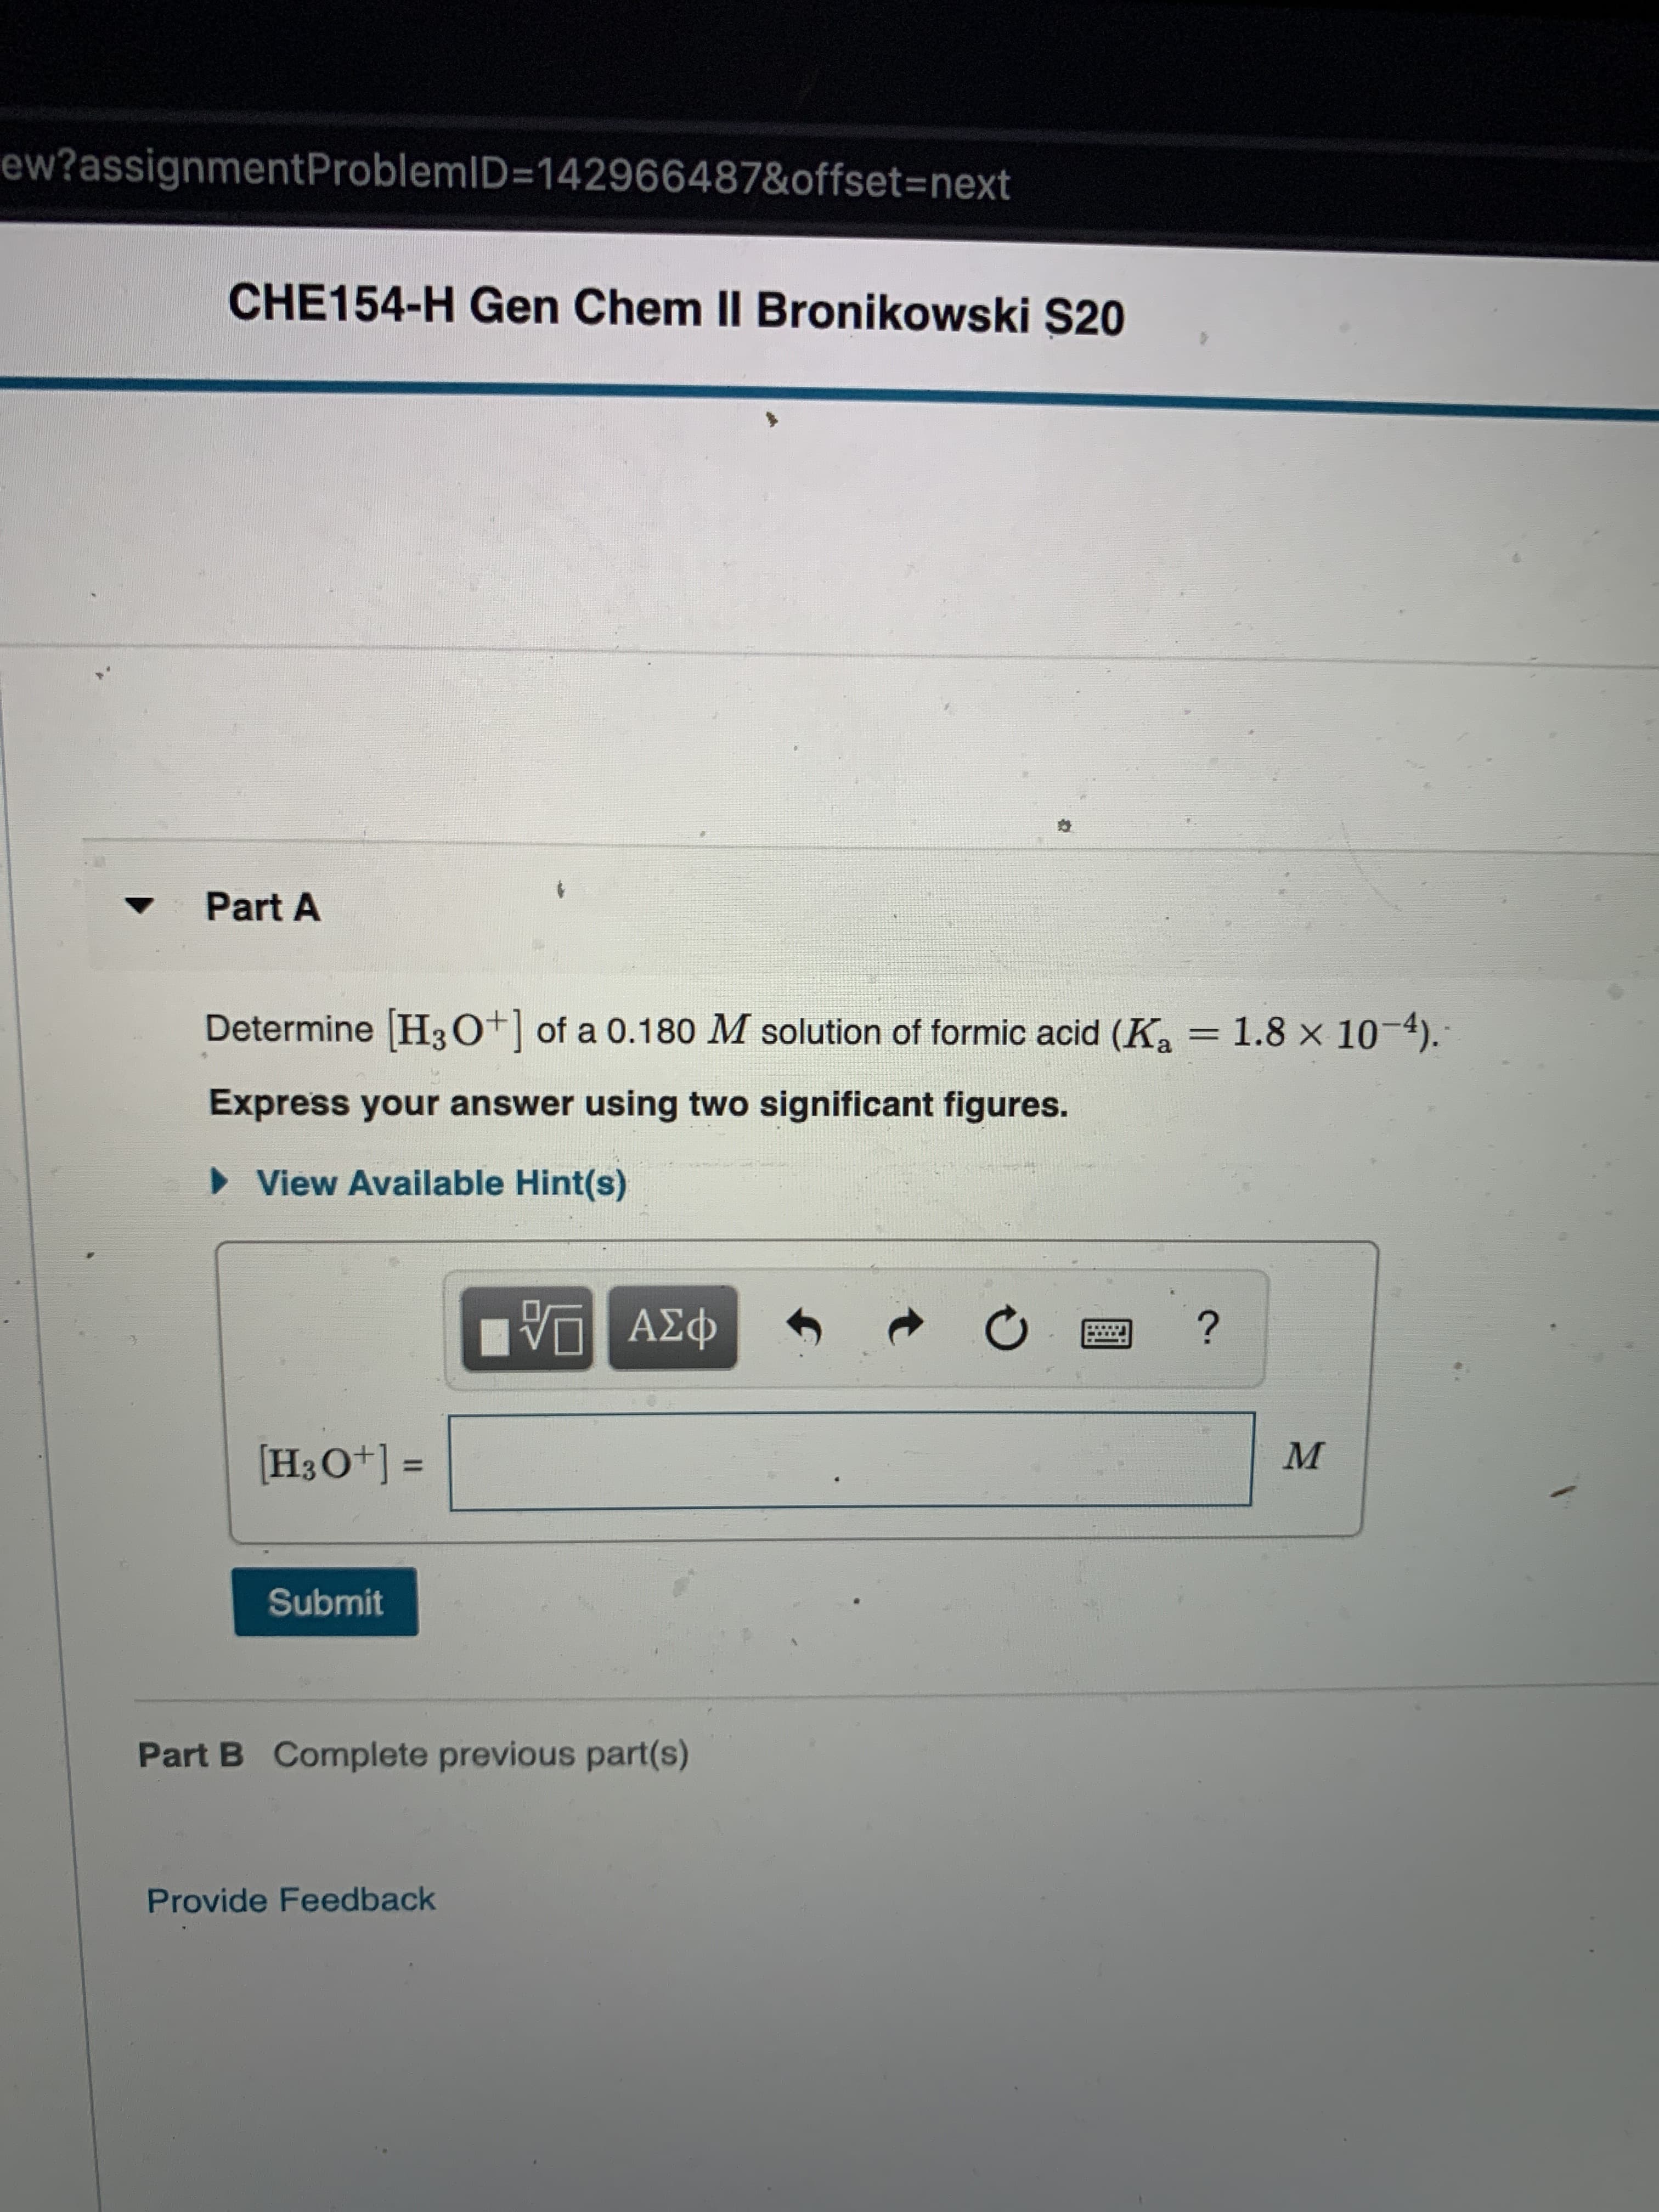 ew?assignmentProblemID=142966487&offset=next
CHE154-H Gen Chem II Bronikowski S20
Part A
Determine H30+] of a 0.180 M solution of formic acid (K, = 1.8 × 10-4).
Express your answer using two significant figures.
• View Available Hint(s)
ΑΣφ
[H3O+] =
M
Submit
Part B Complete previous part(s)
Provide Feedback
